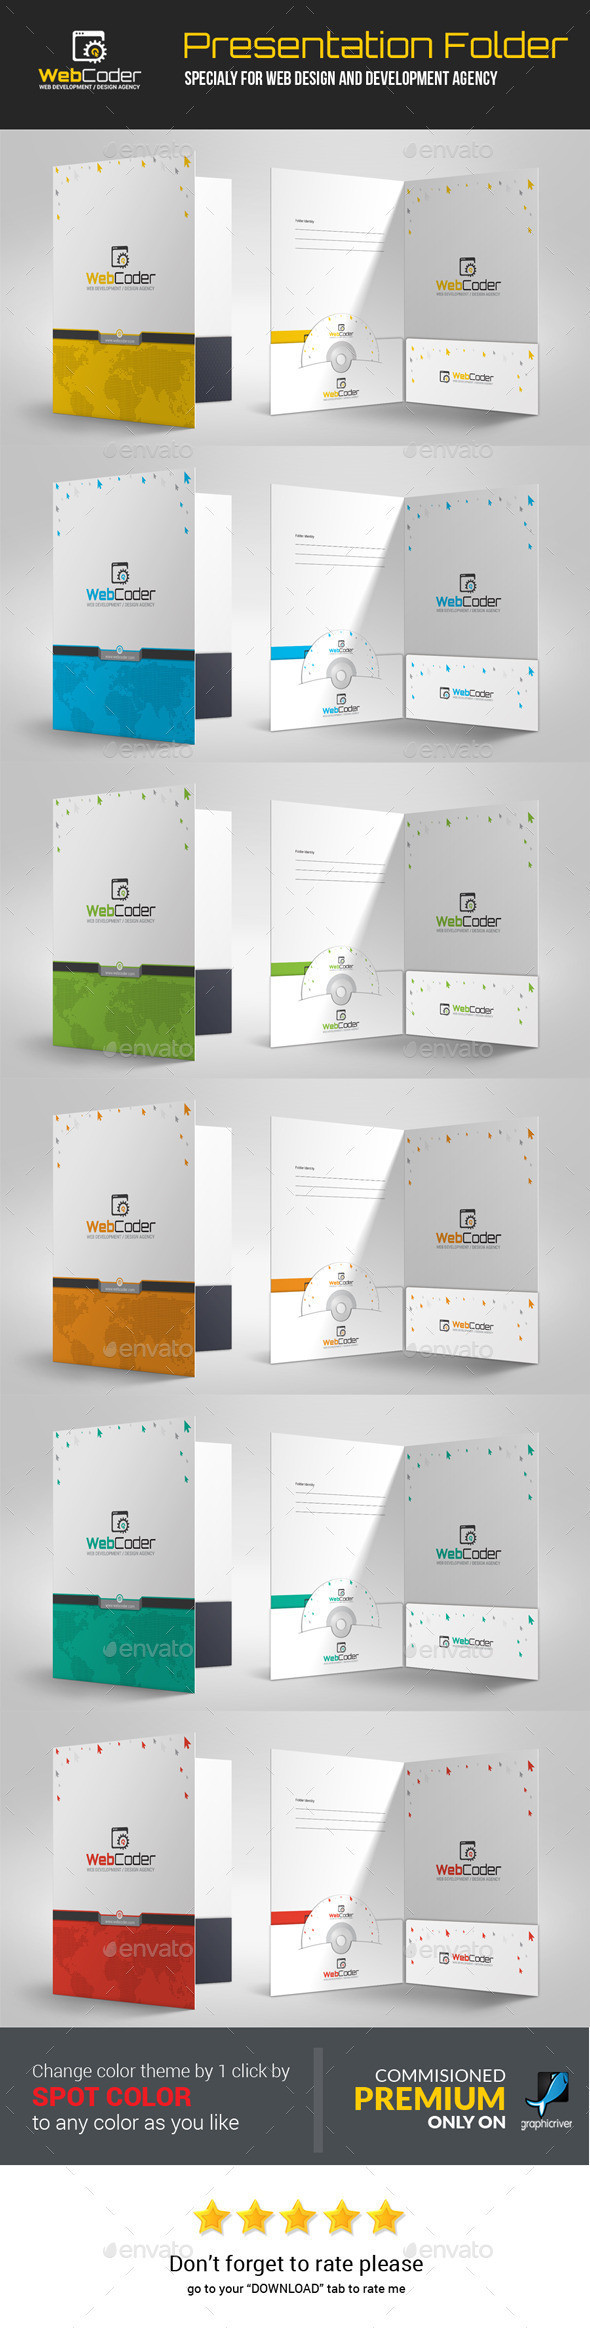 Web coder web design and web development agency company envelop pack image preview